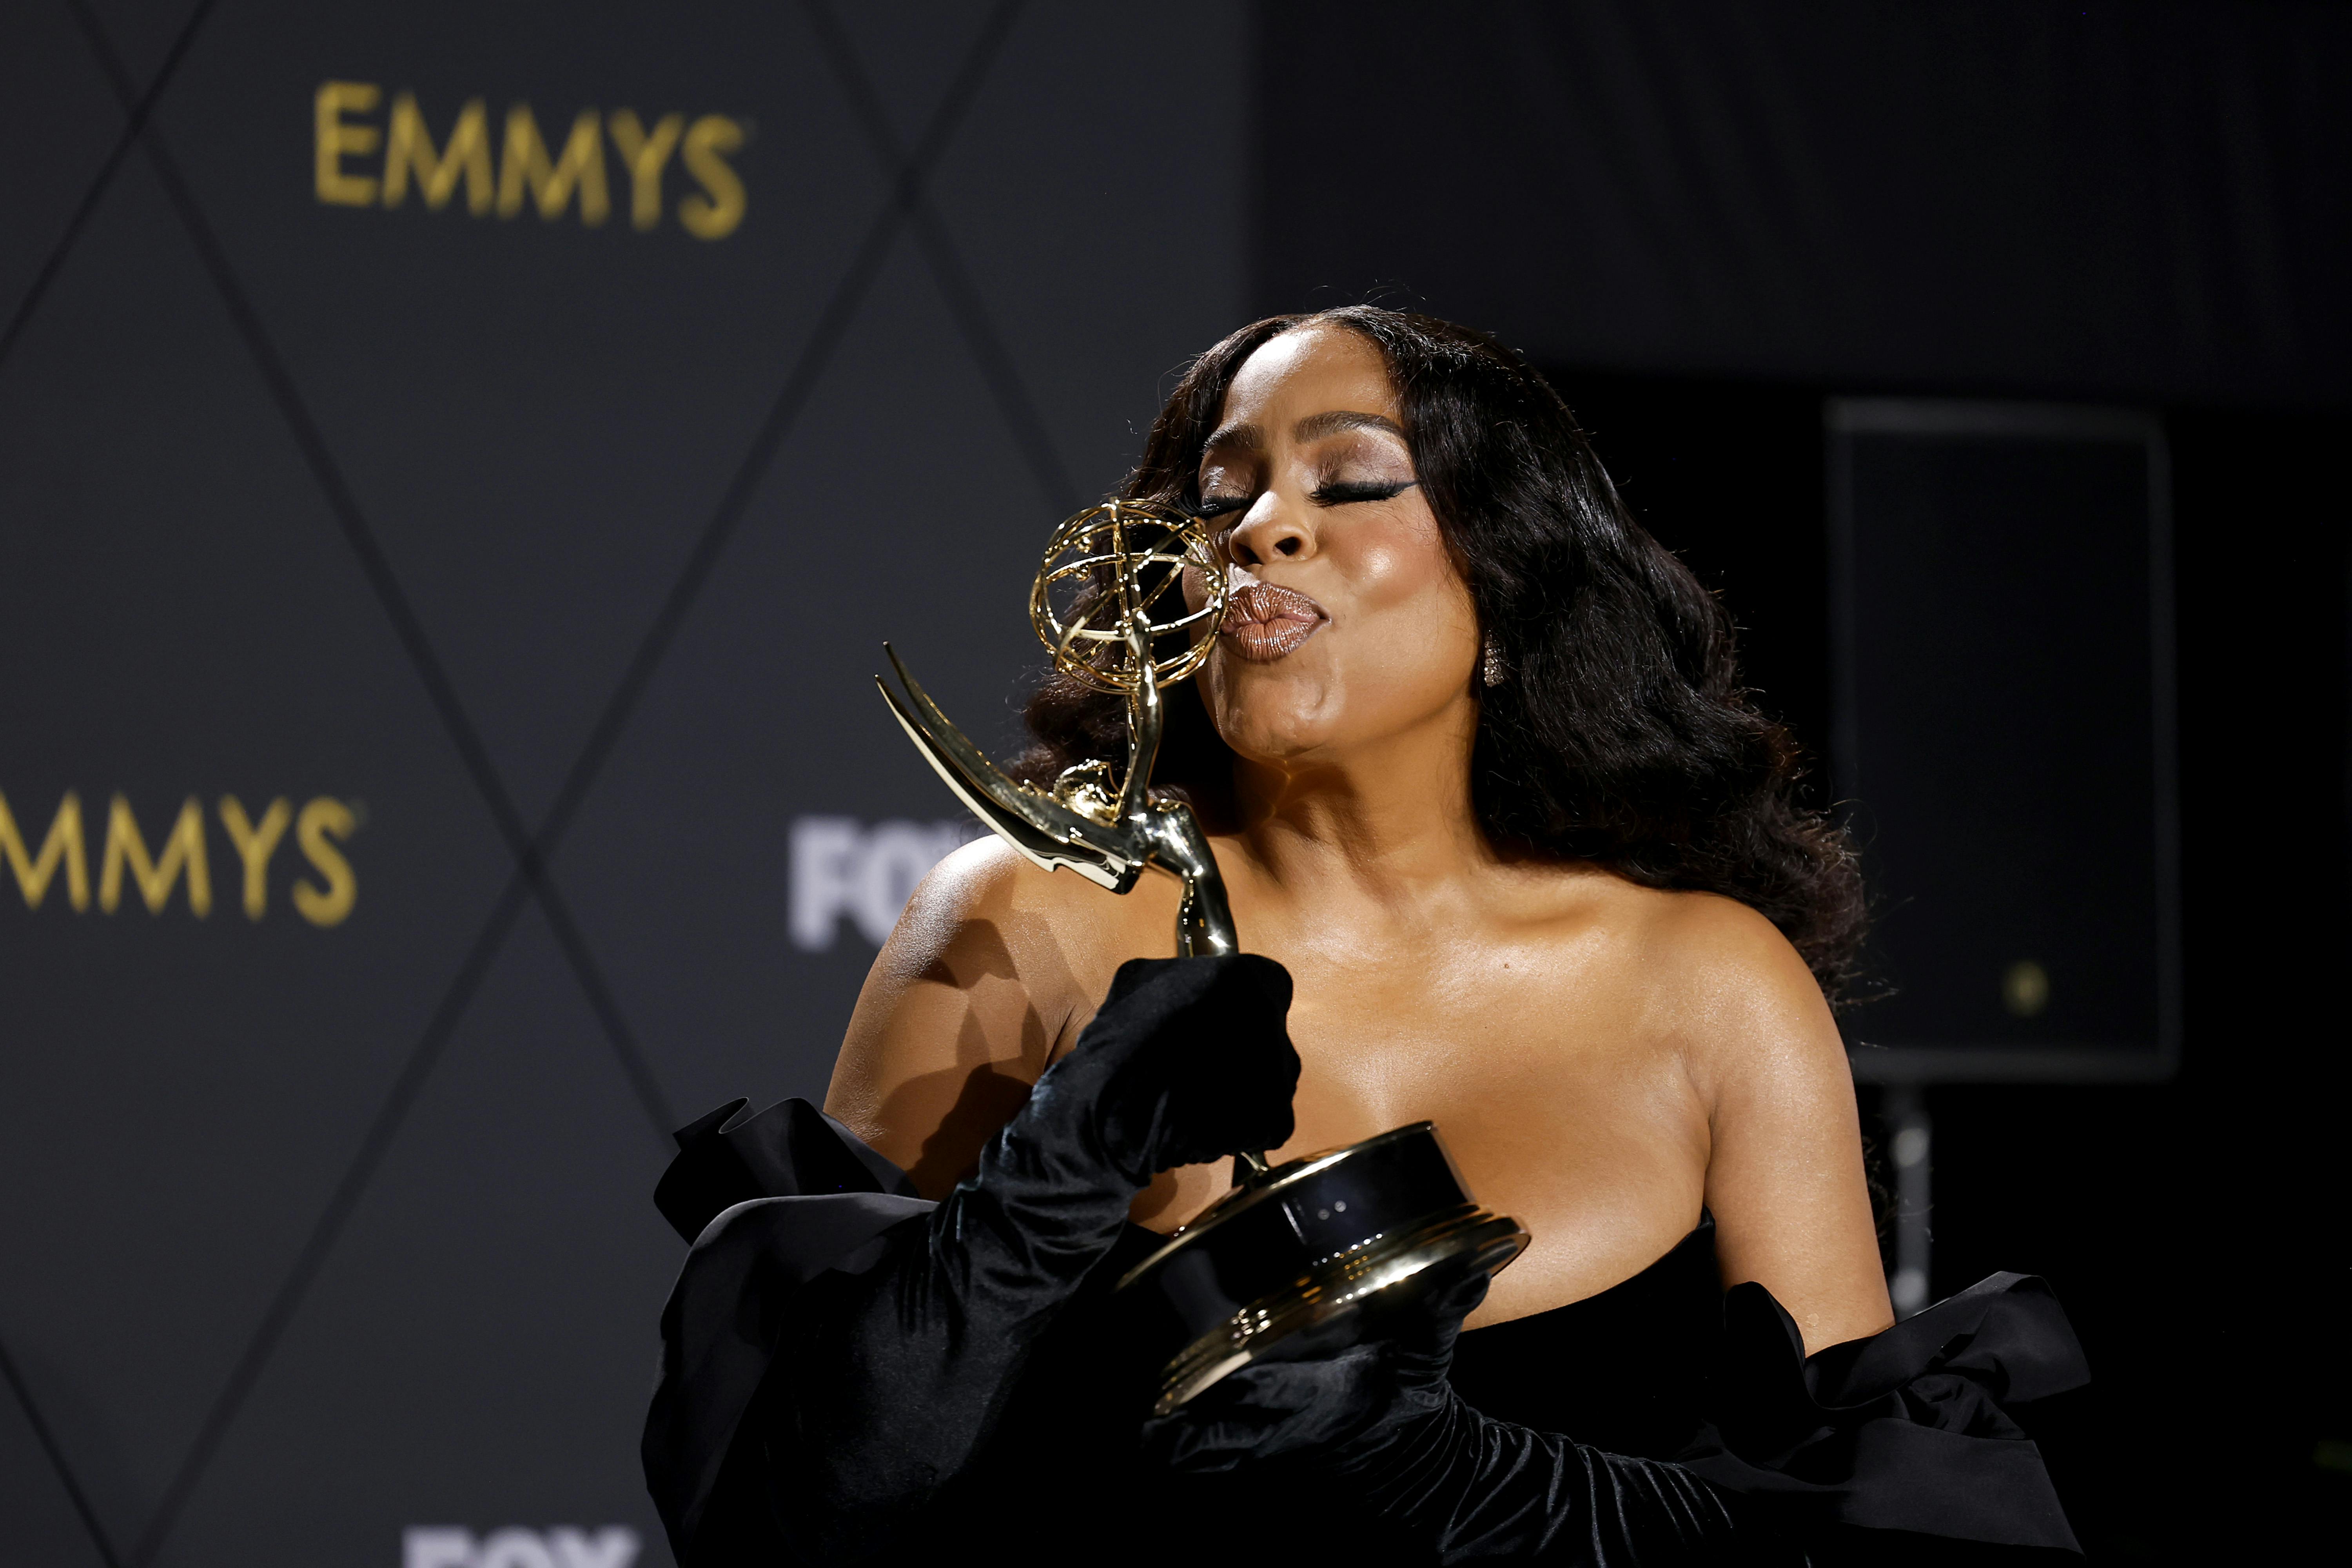 Niecy Nash-Betts wears a strapless black dress and kisses her Emmy award.